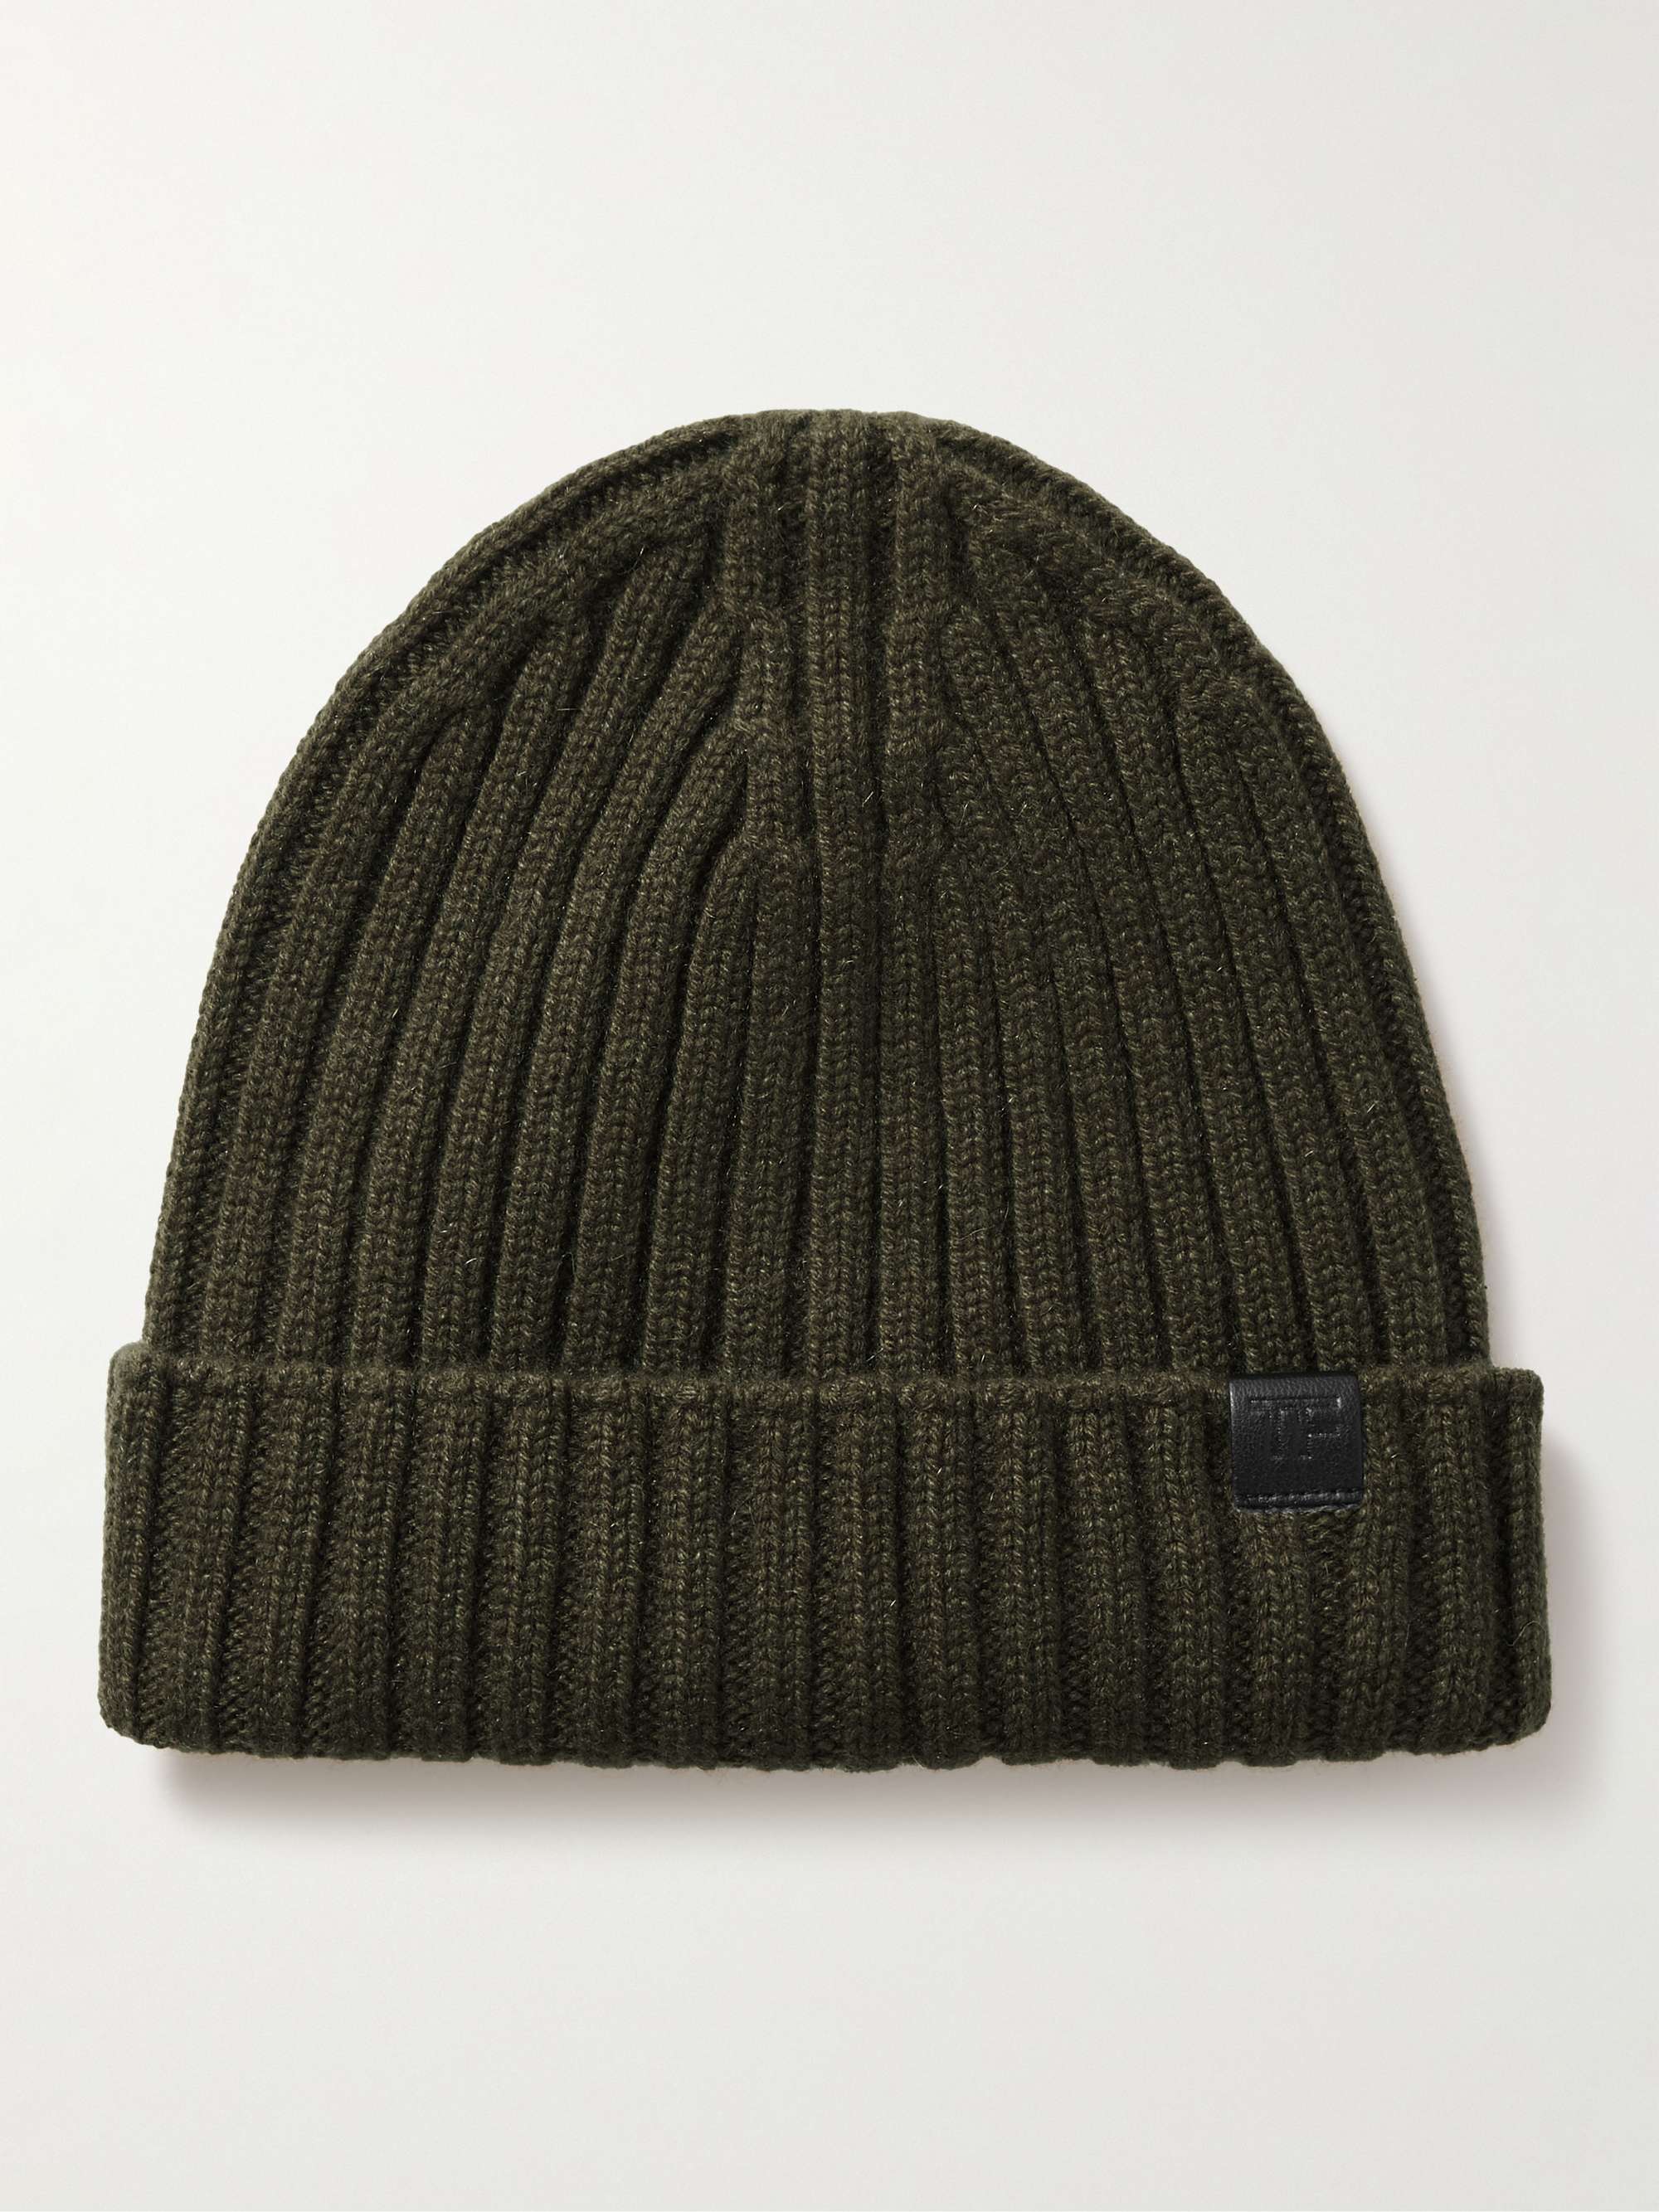 TOM FORD Ribbed Cashmere Beanie